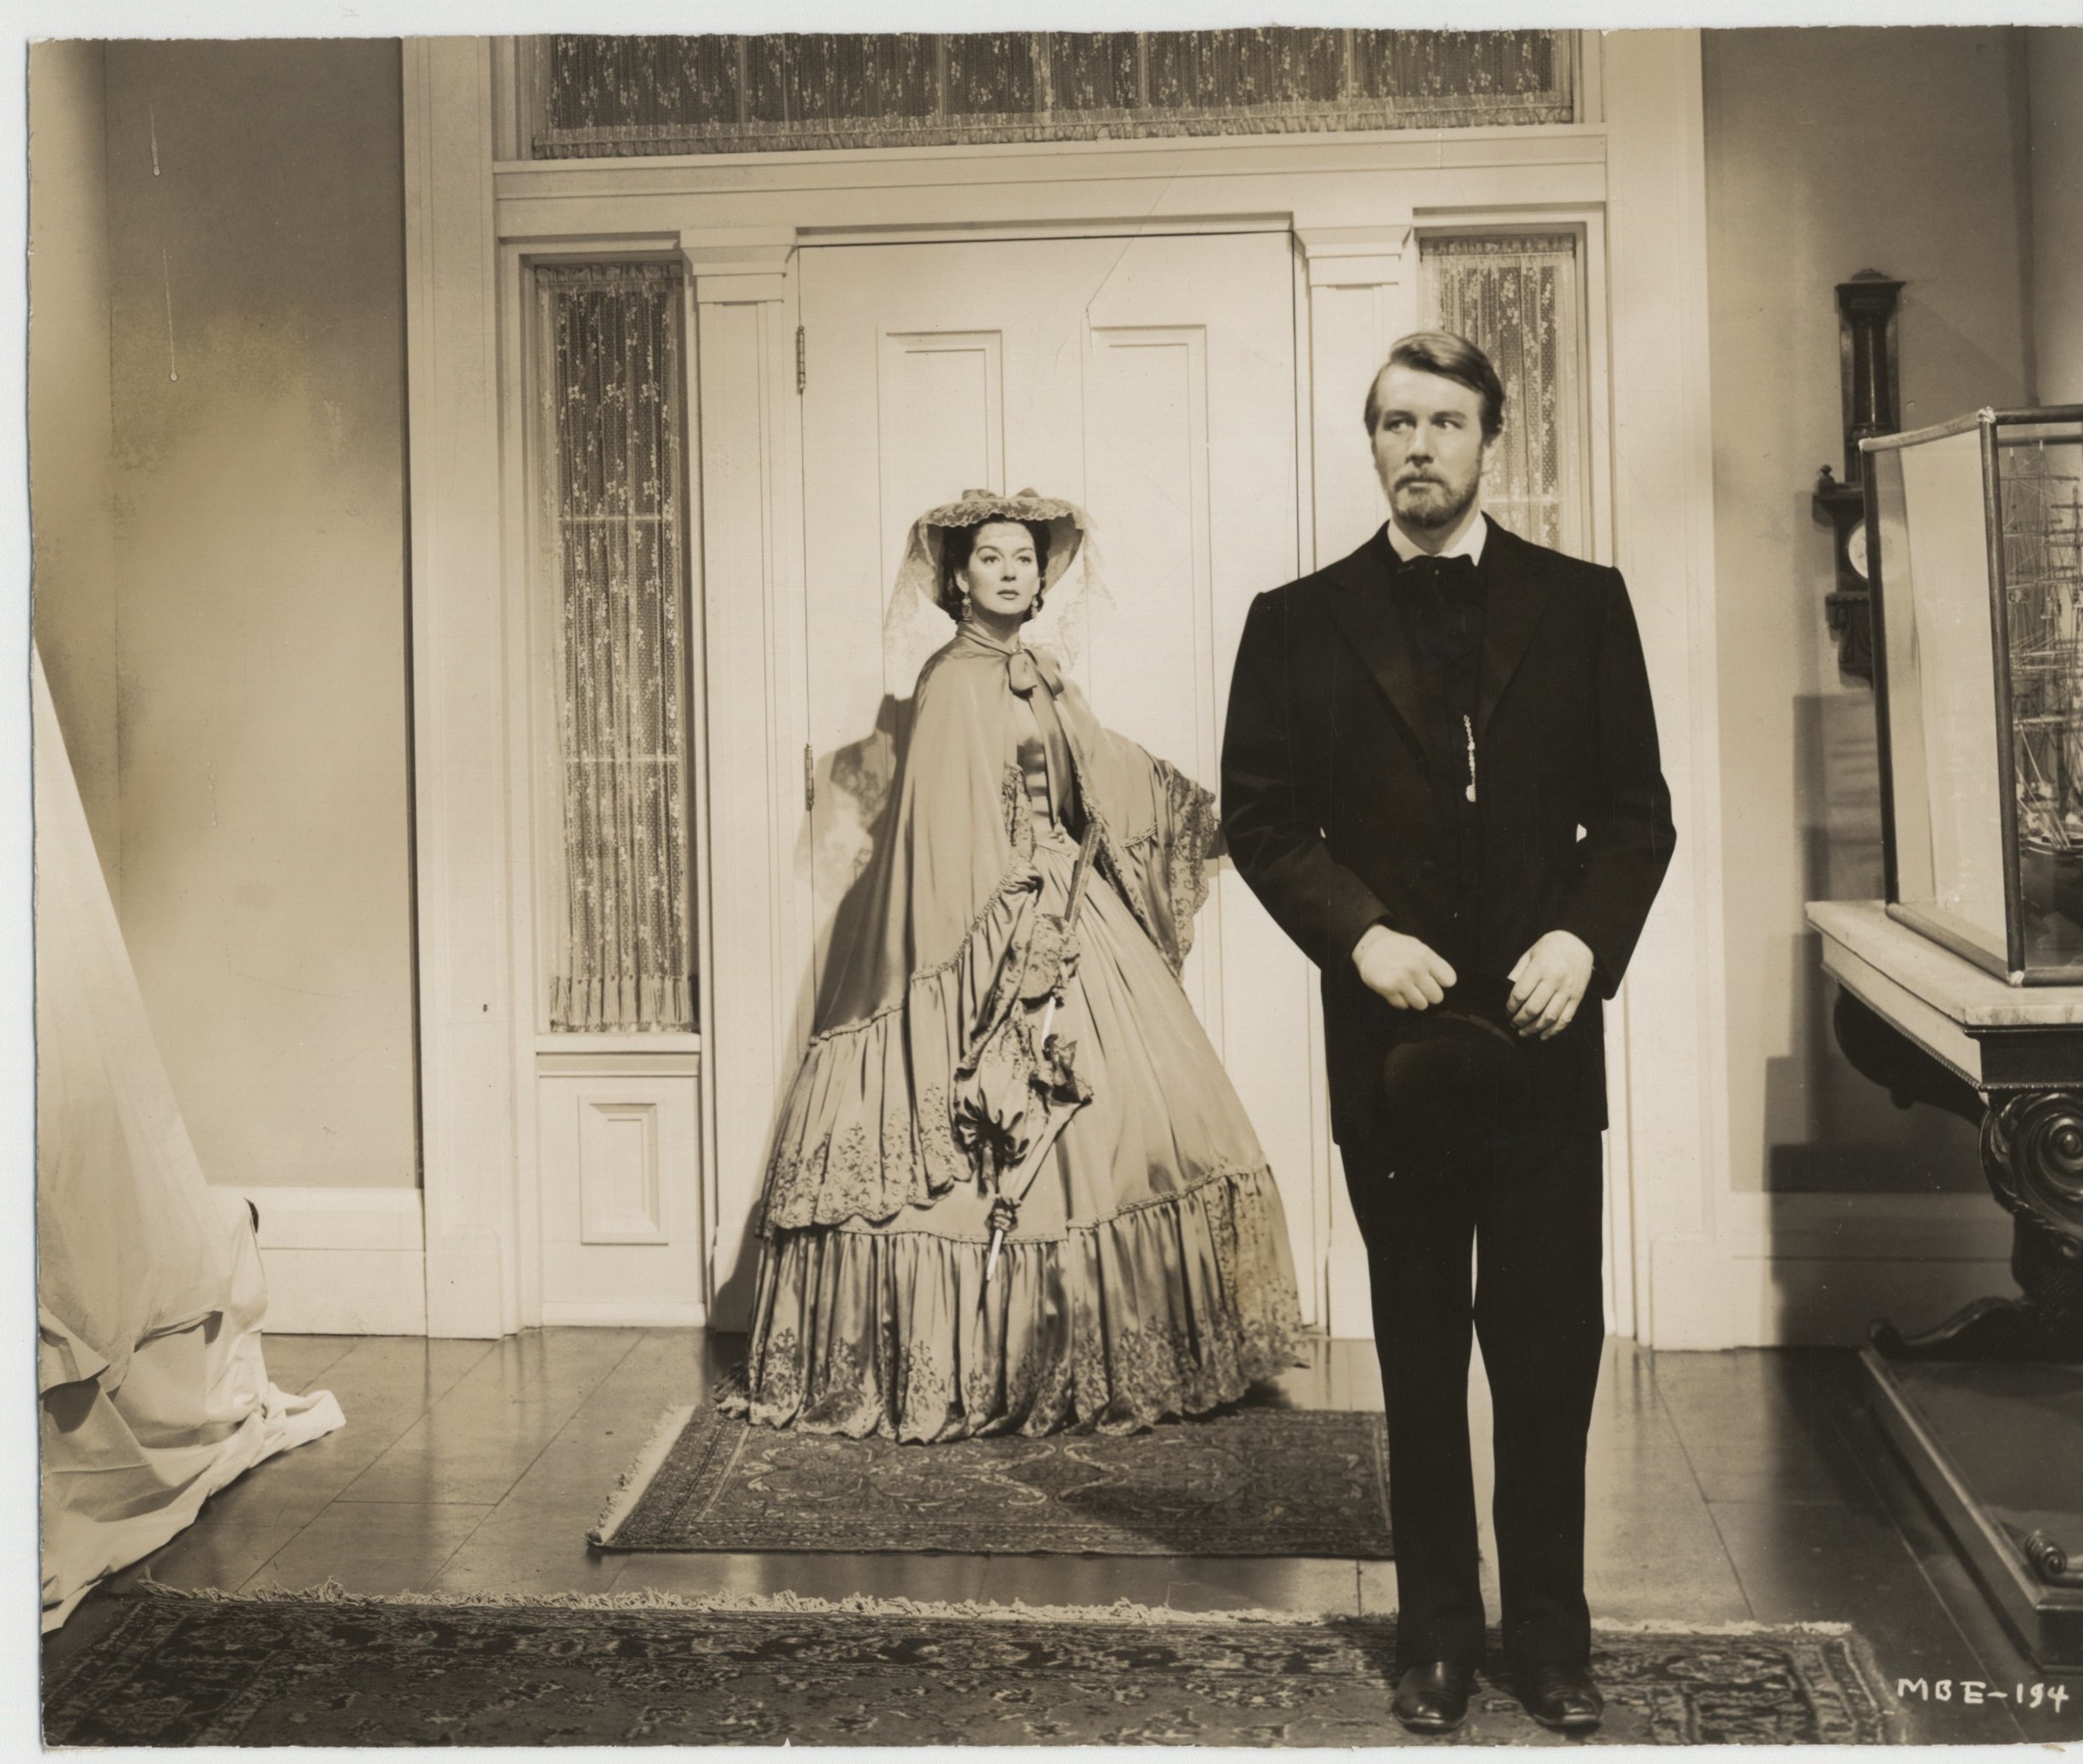 Mourning Becomes Electra (1947) Screenshot 3 